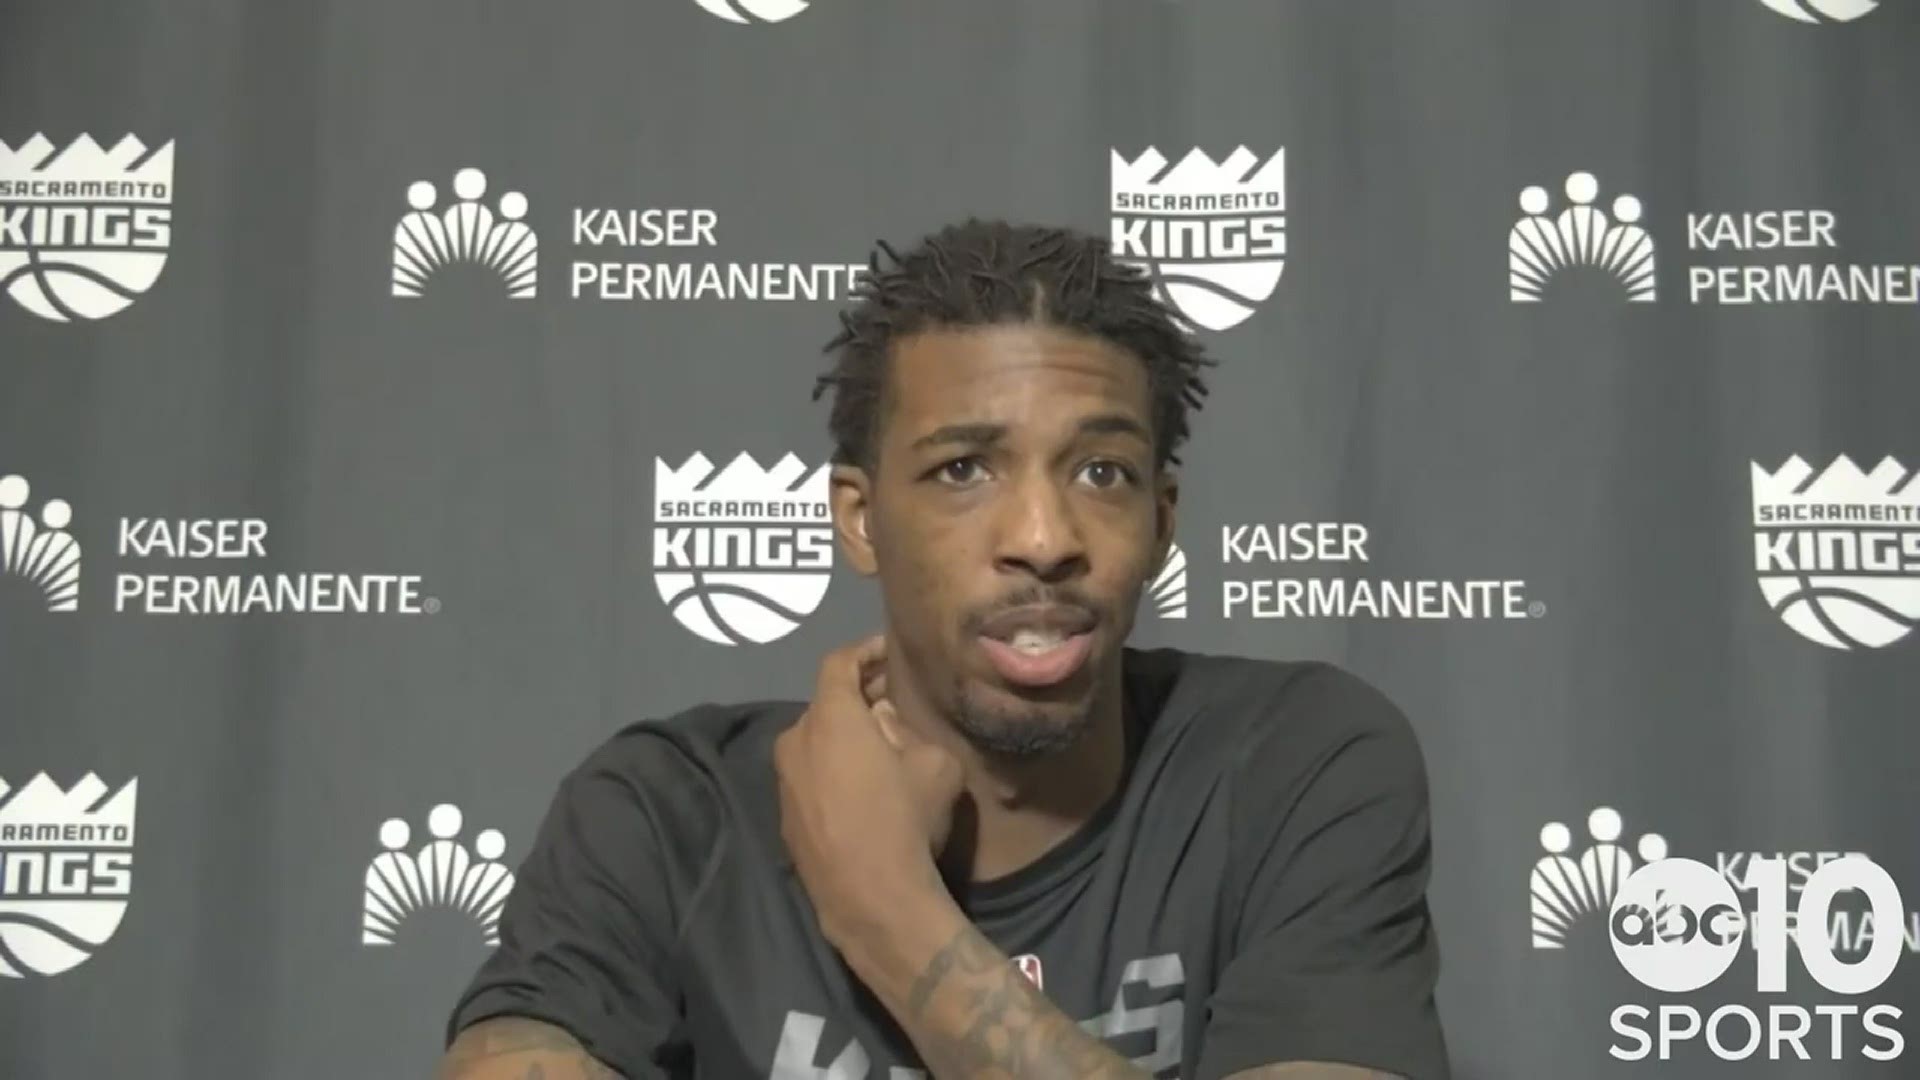 Delon Wright gives his thoughts on the season with the Kings following his trade to Sacramento from Detroit & talks about the positives he'll take into the offseason